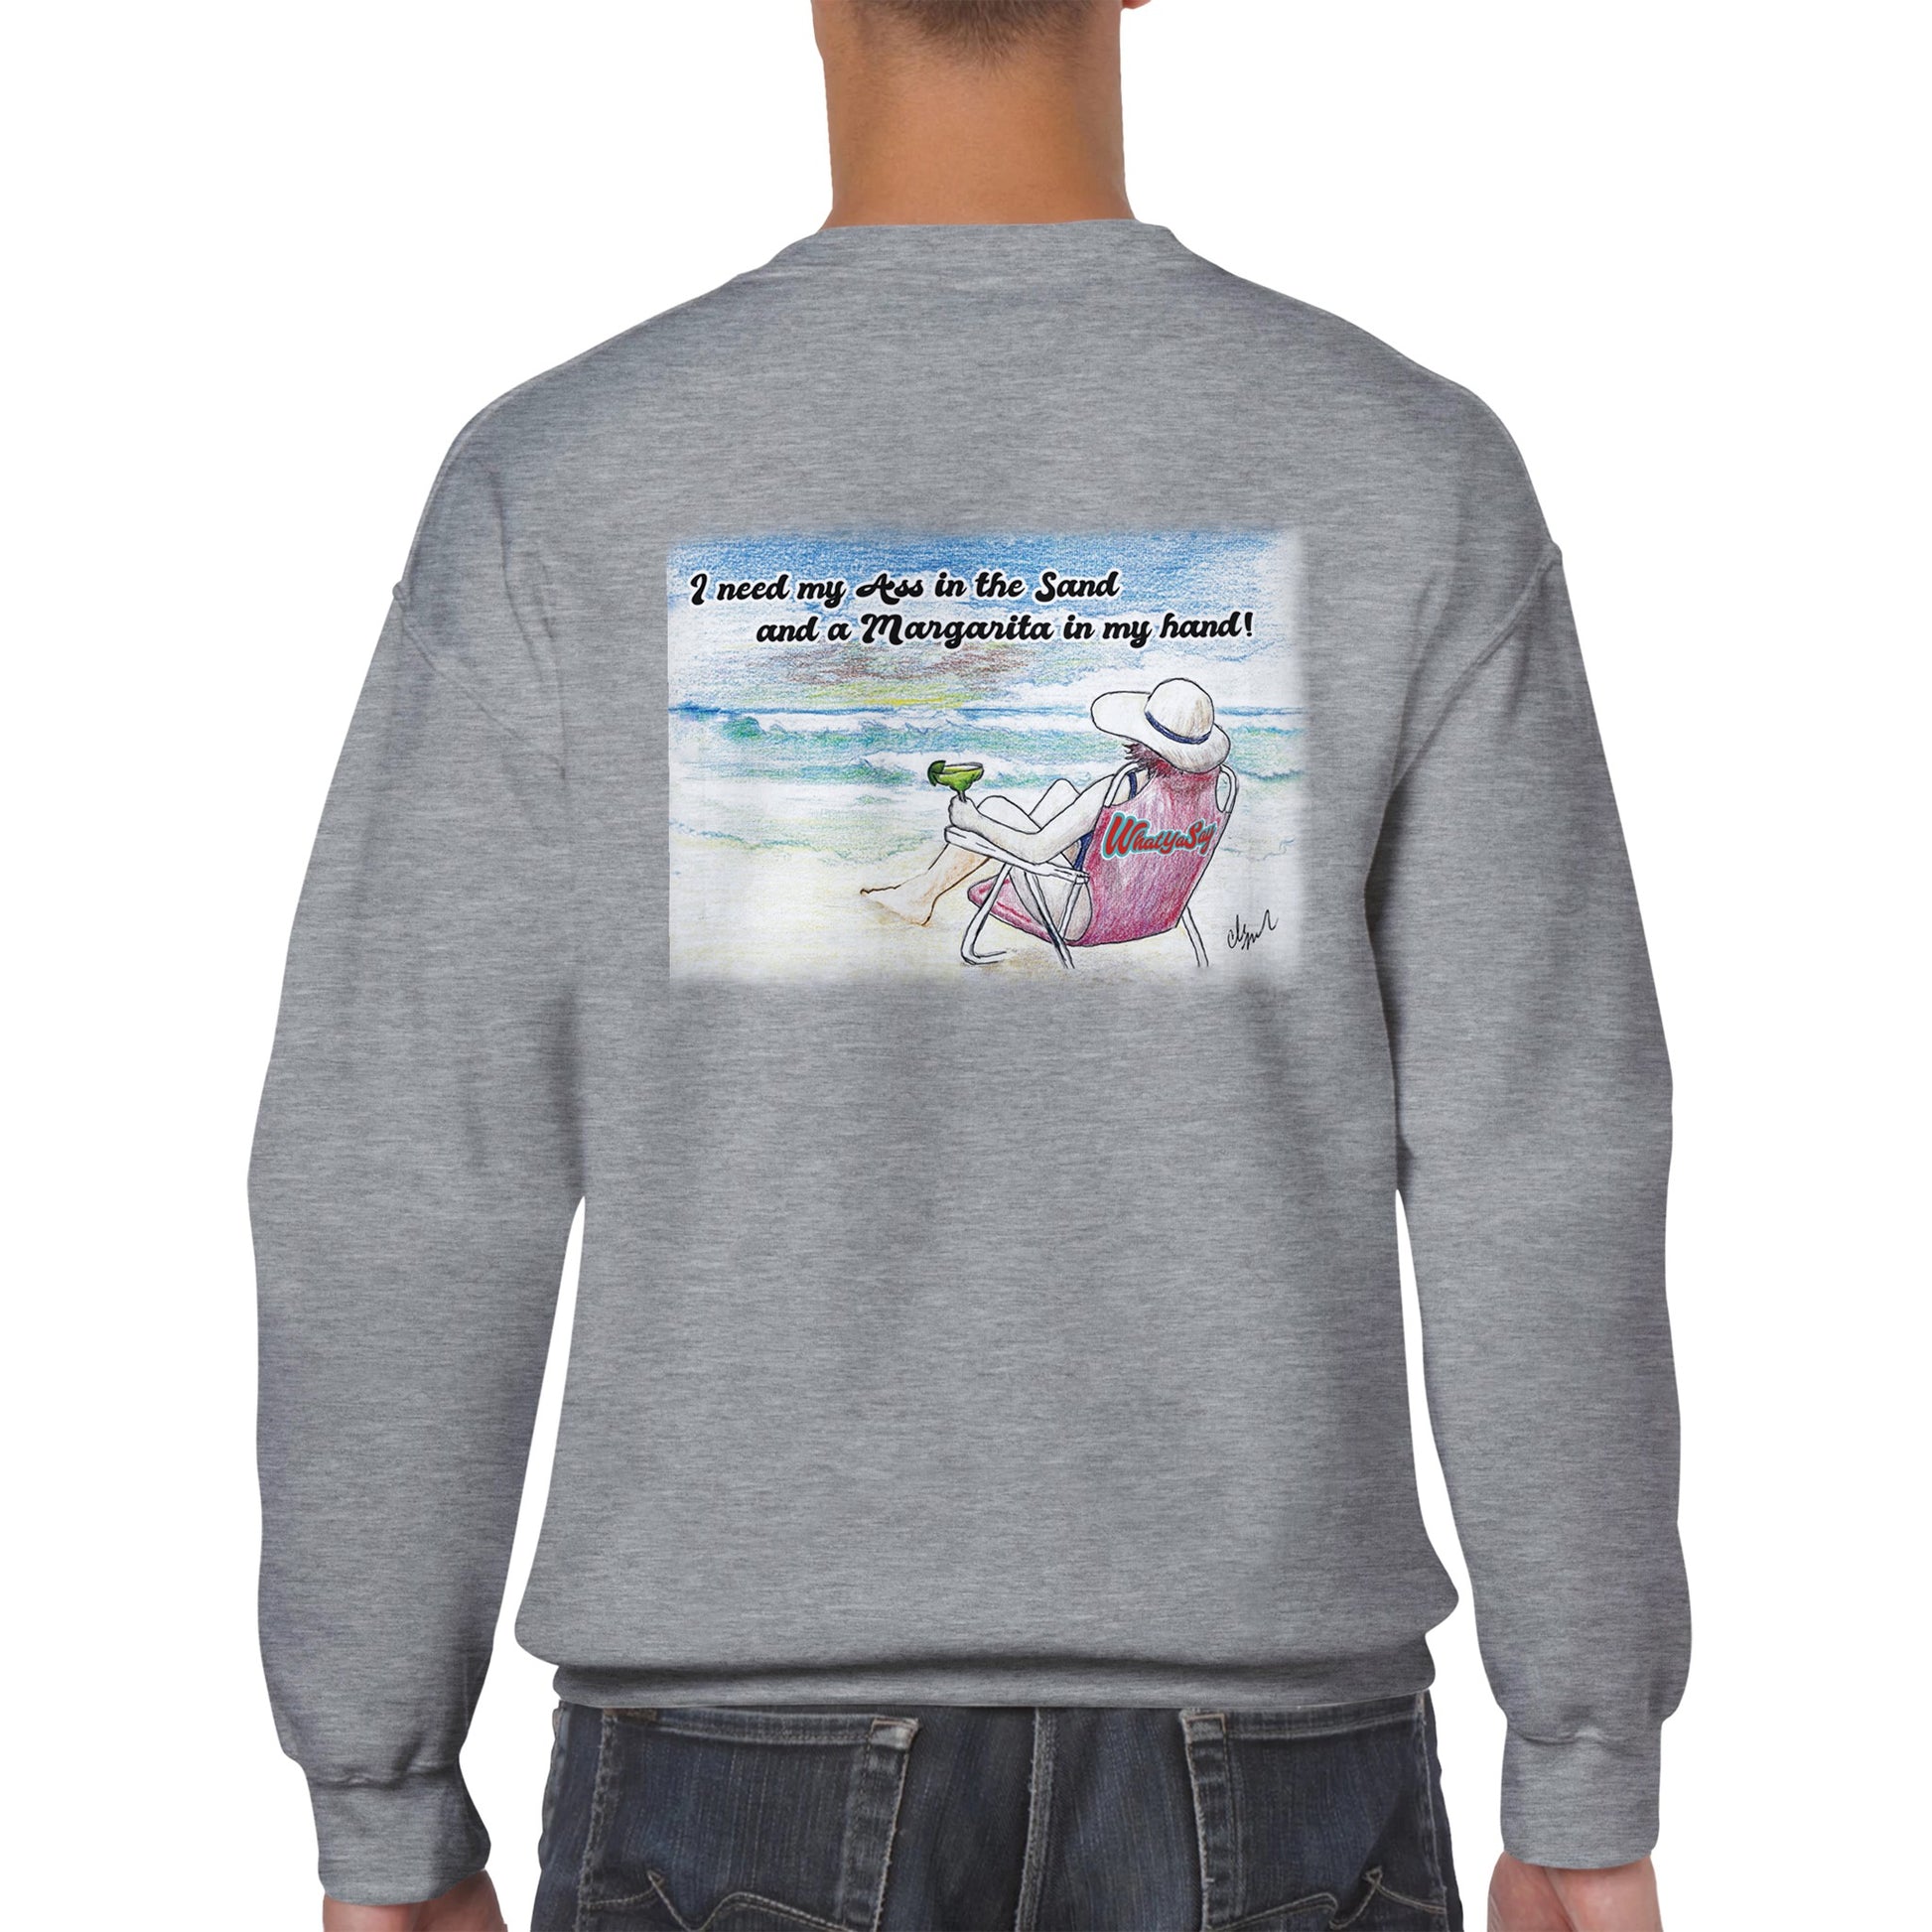 A ash Classic Unisex Crewneck sweatshirt with original artwork and motto I need my Ass in the Sand and a Margarita in my Hand on back and Whatya Say logo on front from WhatYa Say Apparel a rear view of short haired male model.